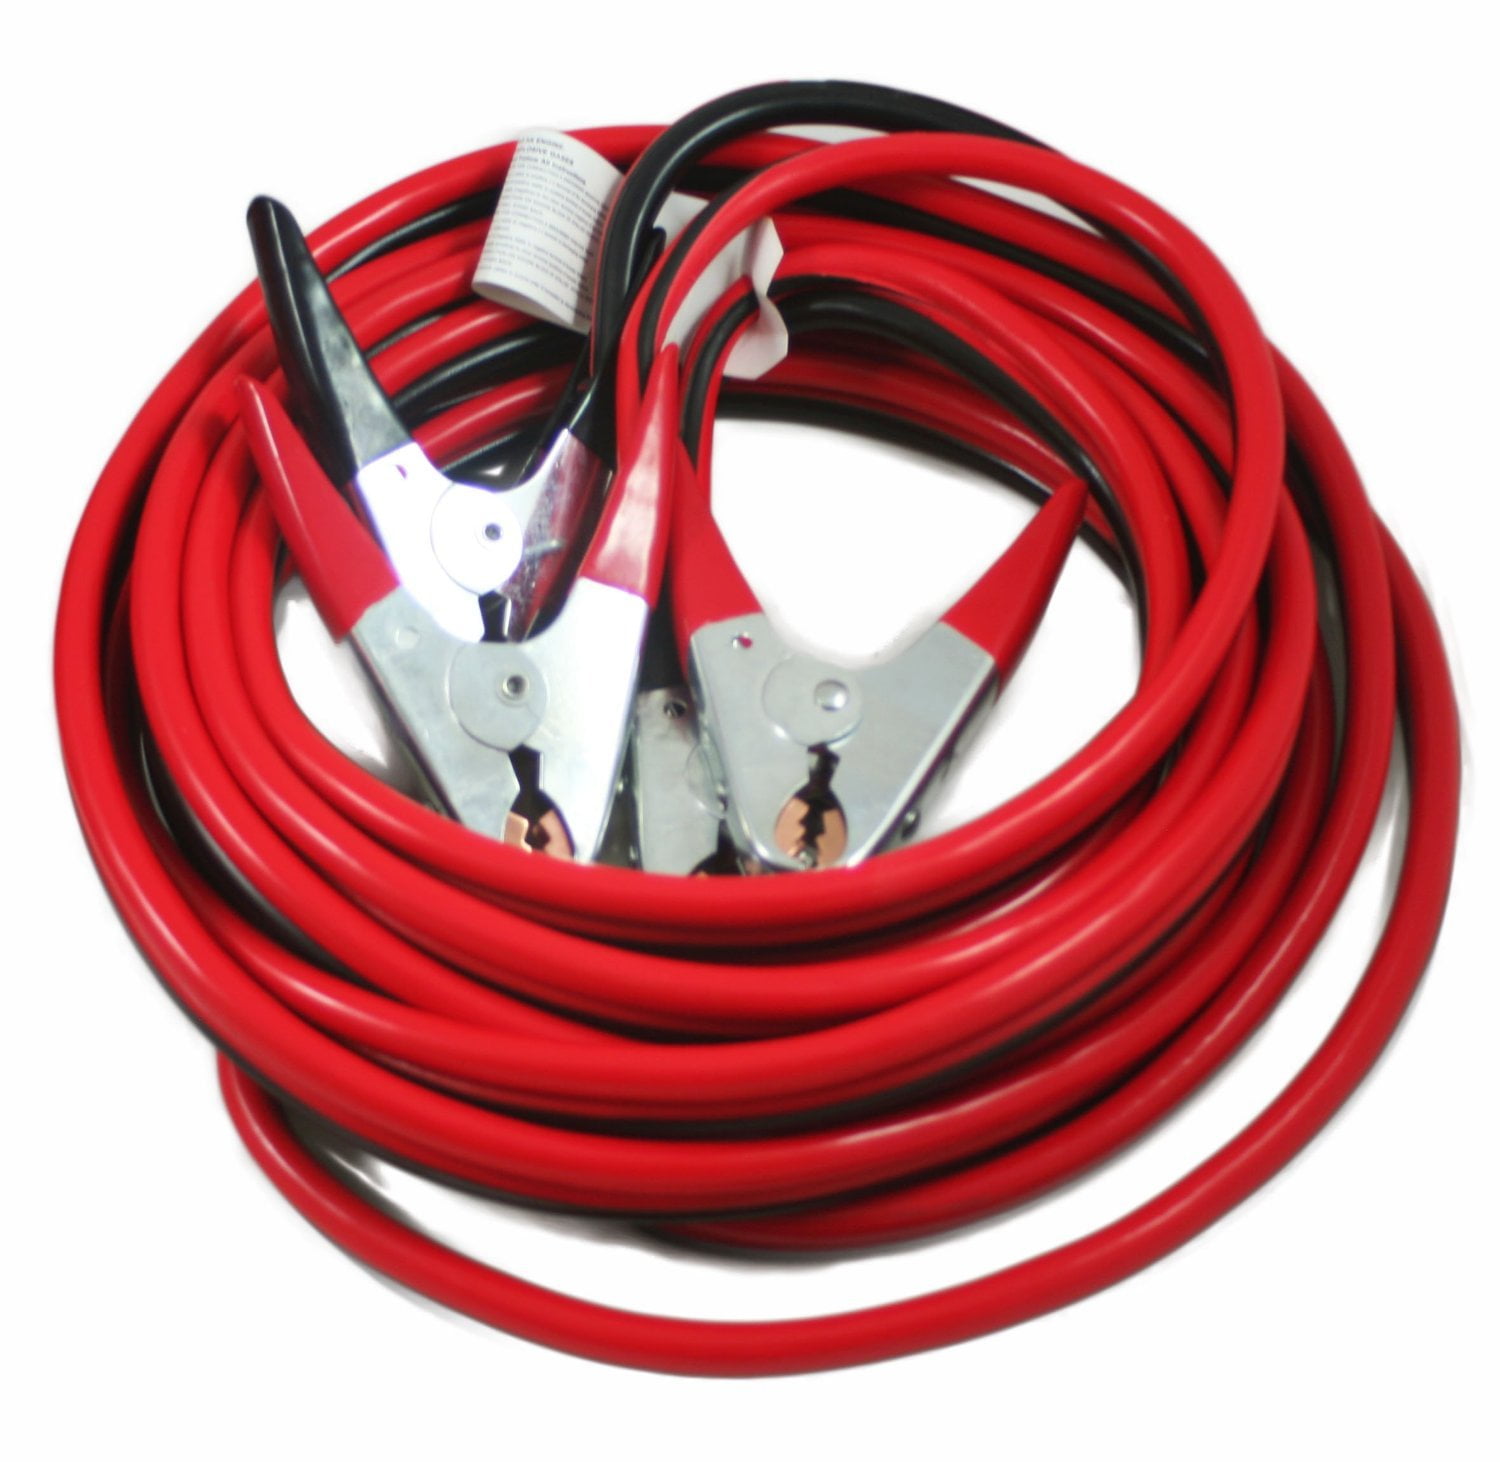 25FT 2 Gauge HD Booster Cable Jumping Cables Power Jumper 600 AMP 